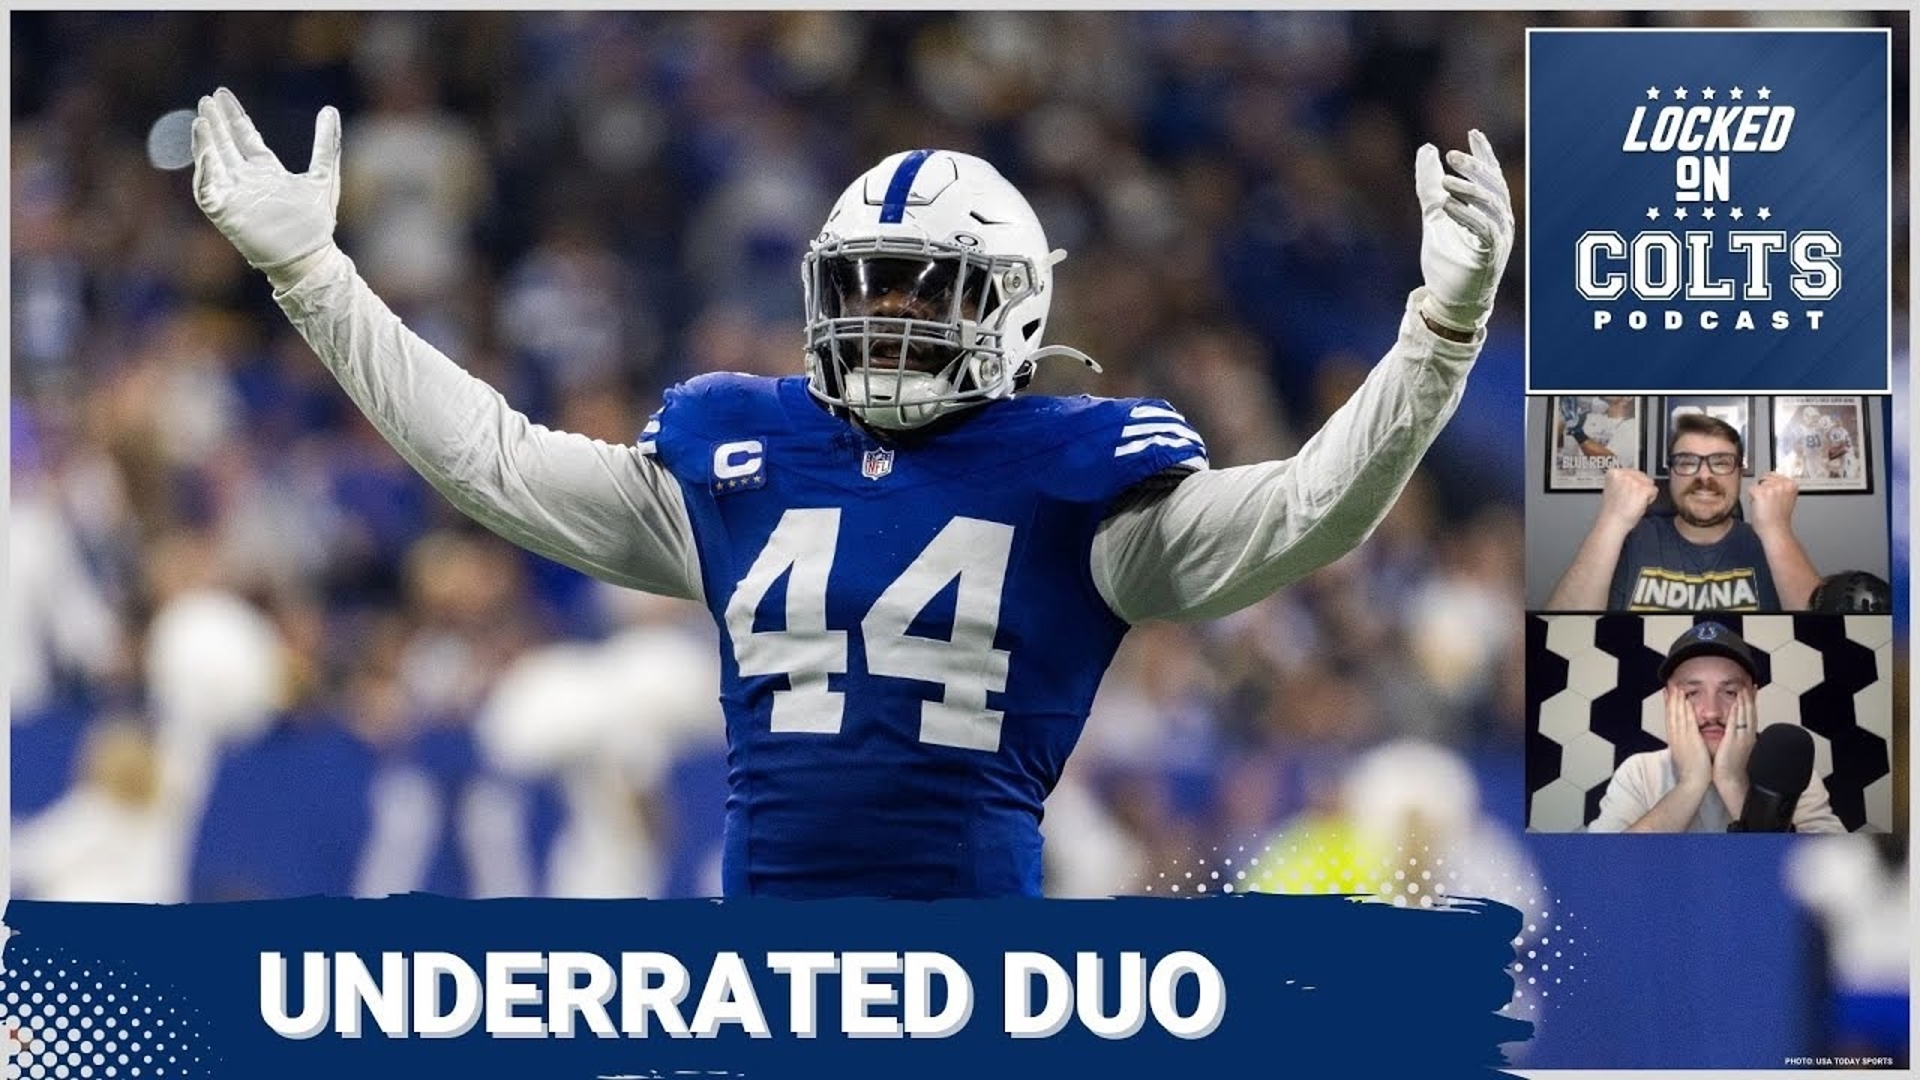 Indianapolis Colts linebackers Zaire Franklin and E.J Speed were left out of Pro Football Focus' top linebacker positional group ranking recently.